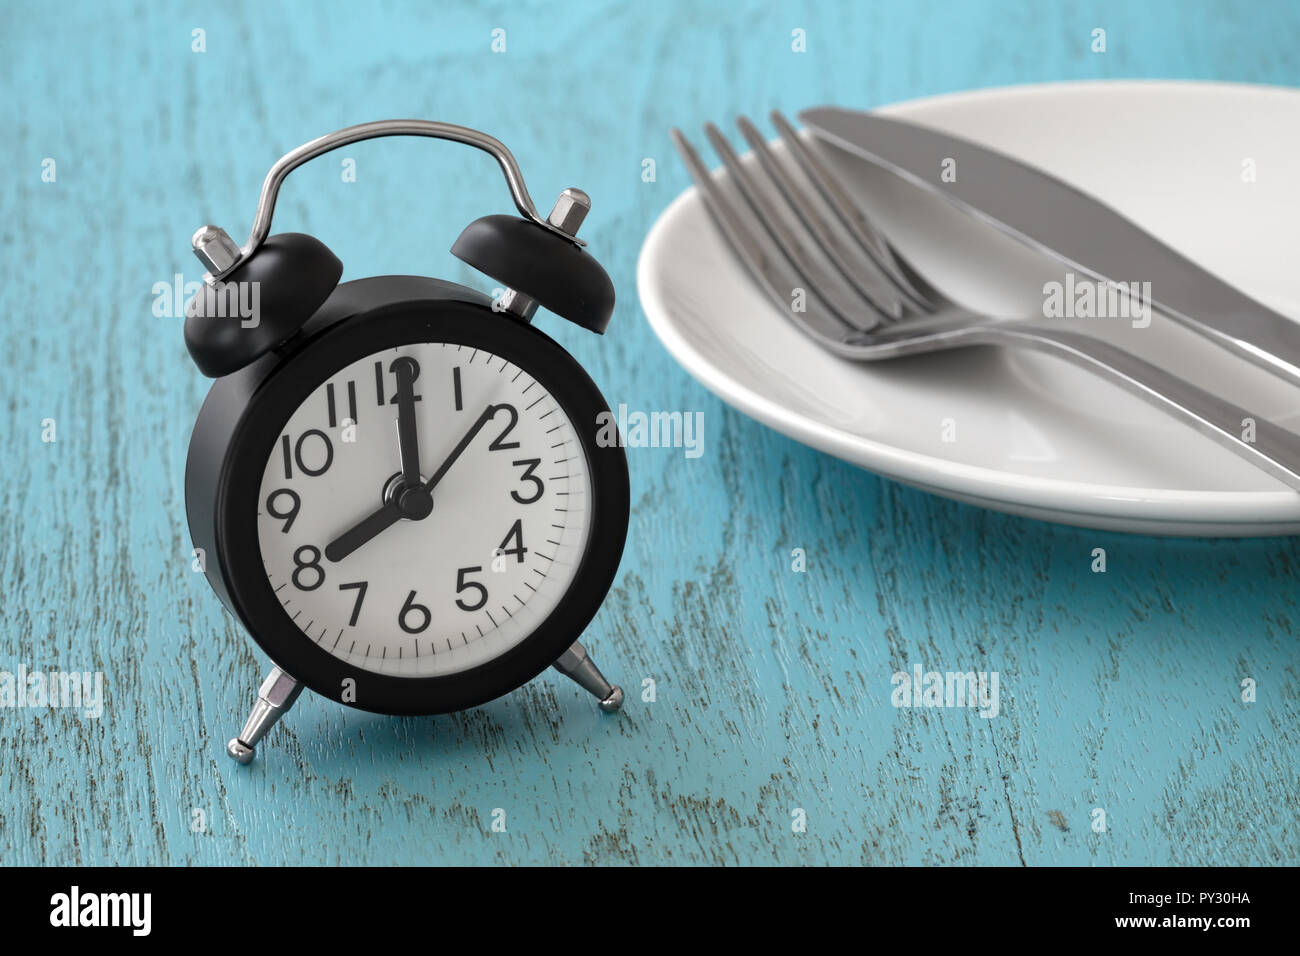 Clock with fork and knife on white plate, intermittent fasting, meal plan, weight loss concept Stock Photo